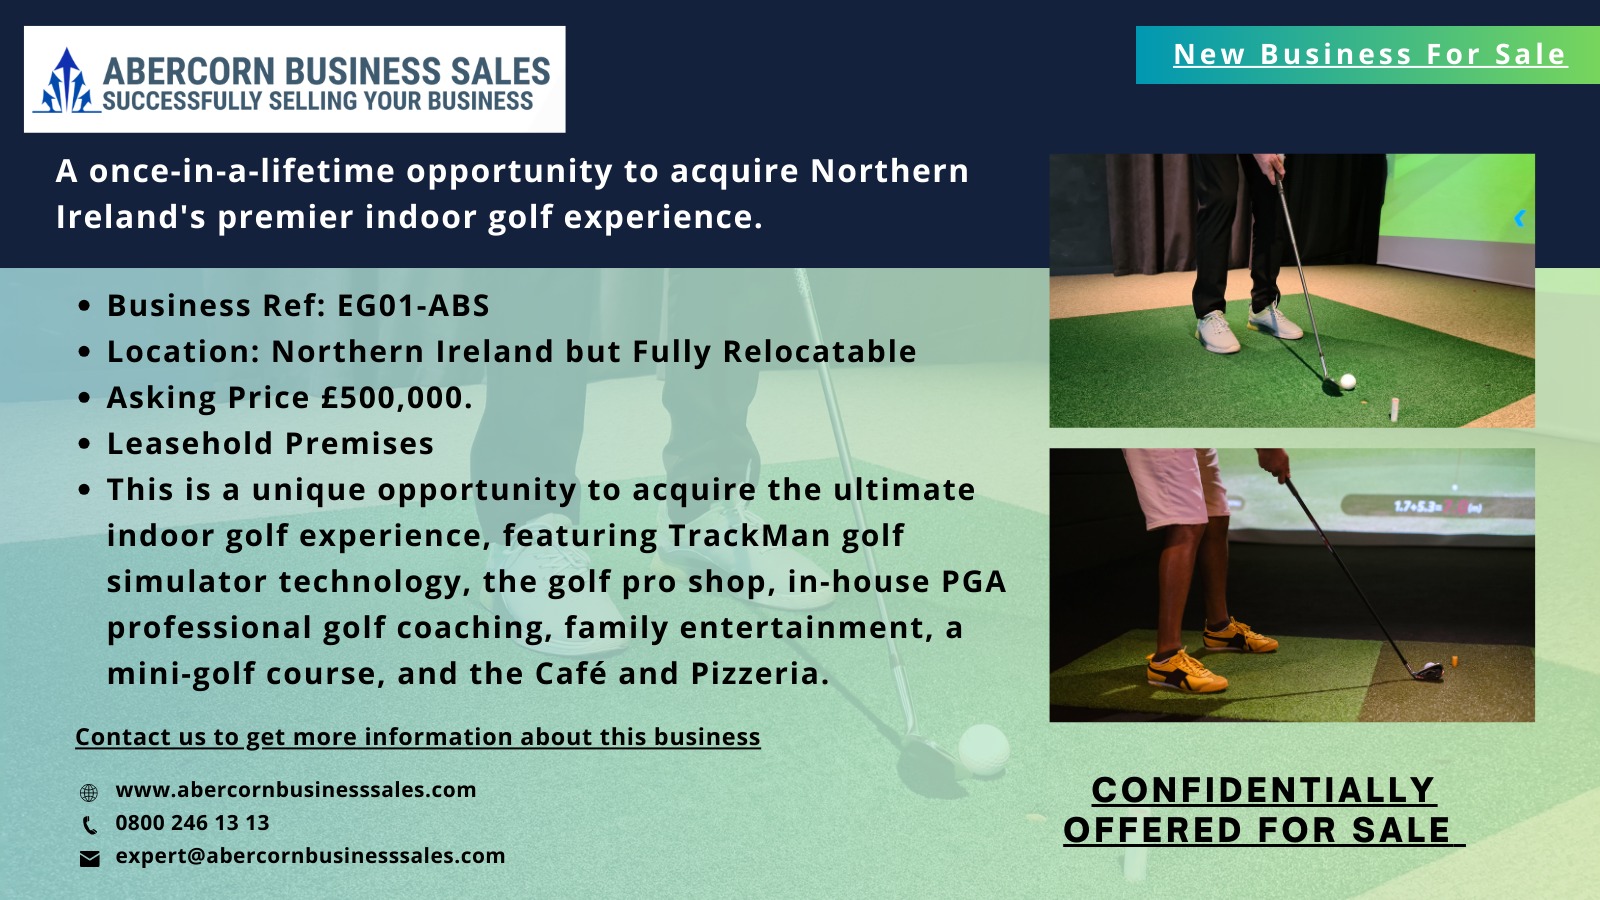 EG01-ABS - A once-in-a-lifetime opportunity to acquire Northern Ireland's premier indoor golf experience